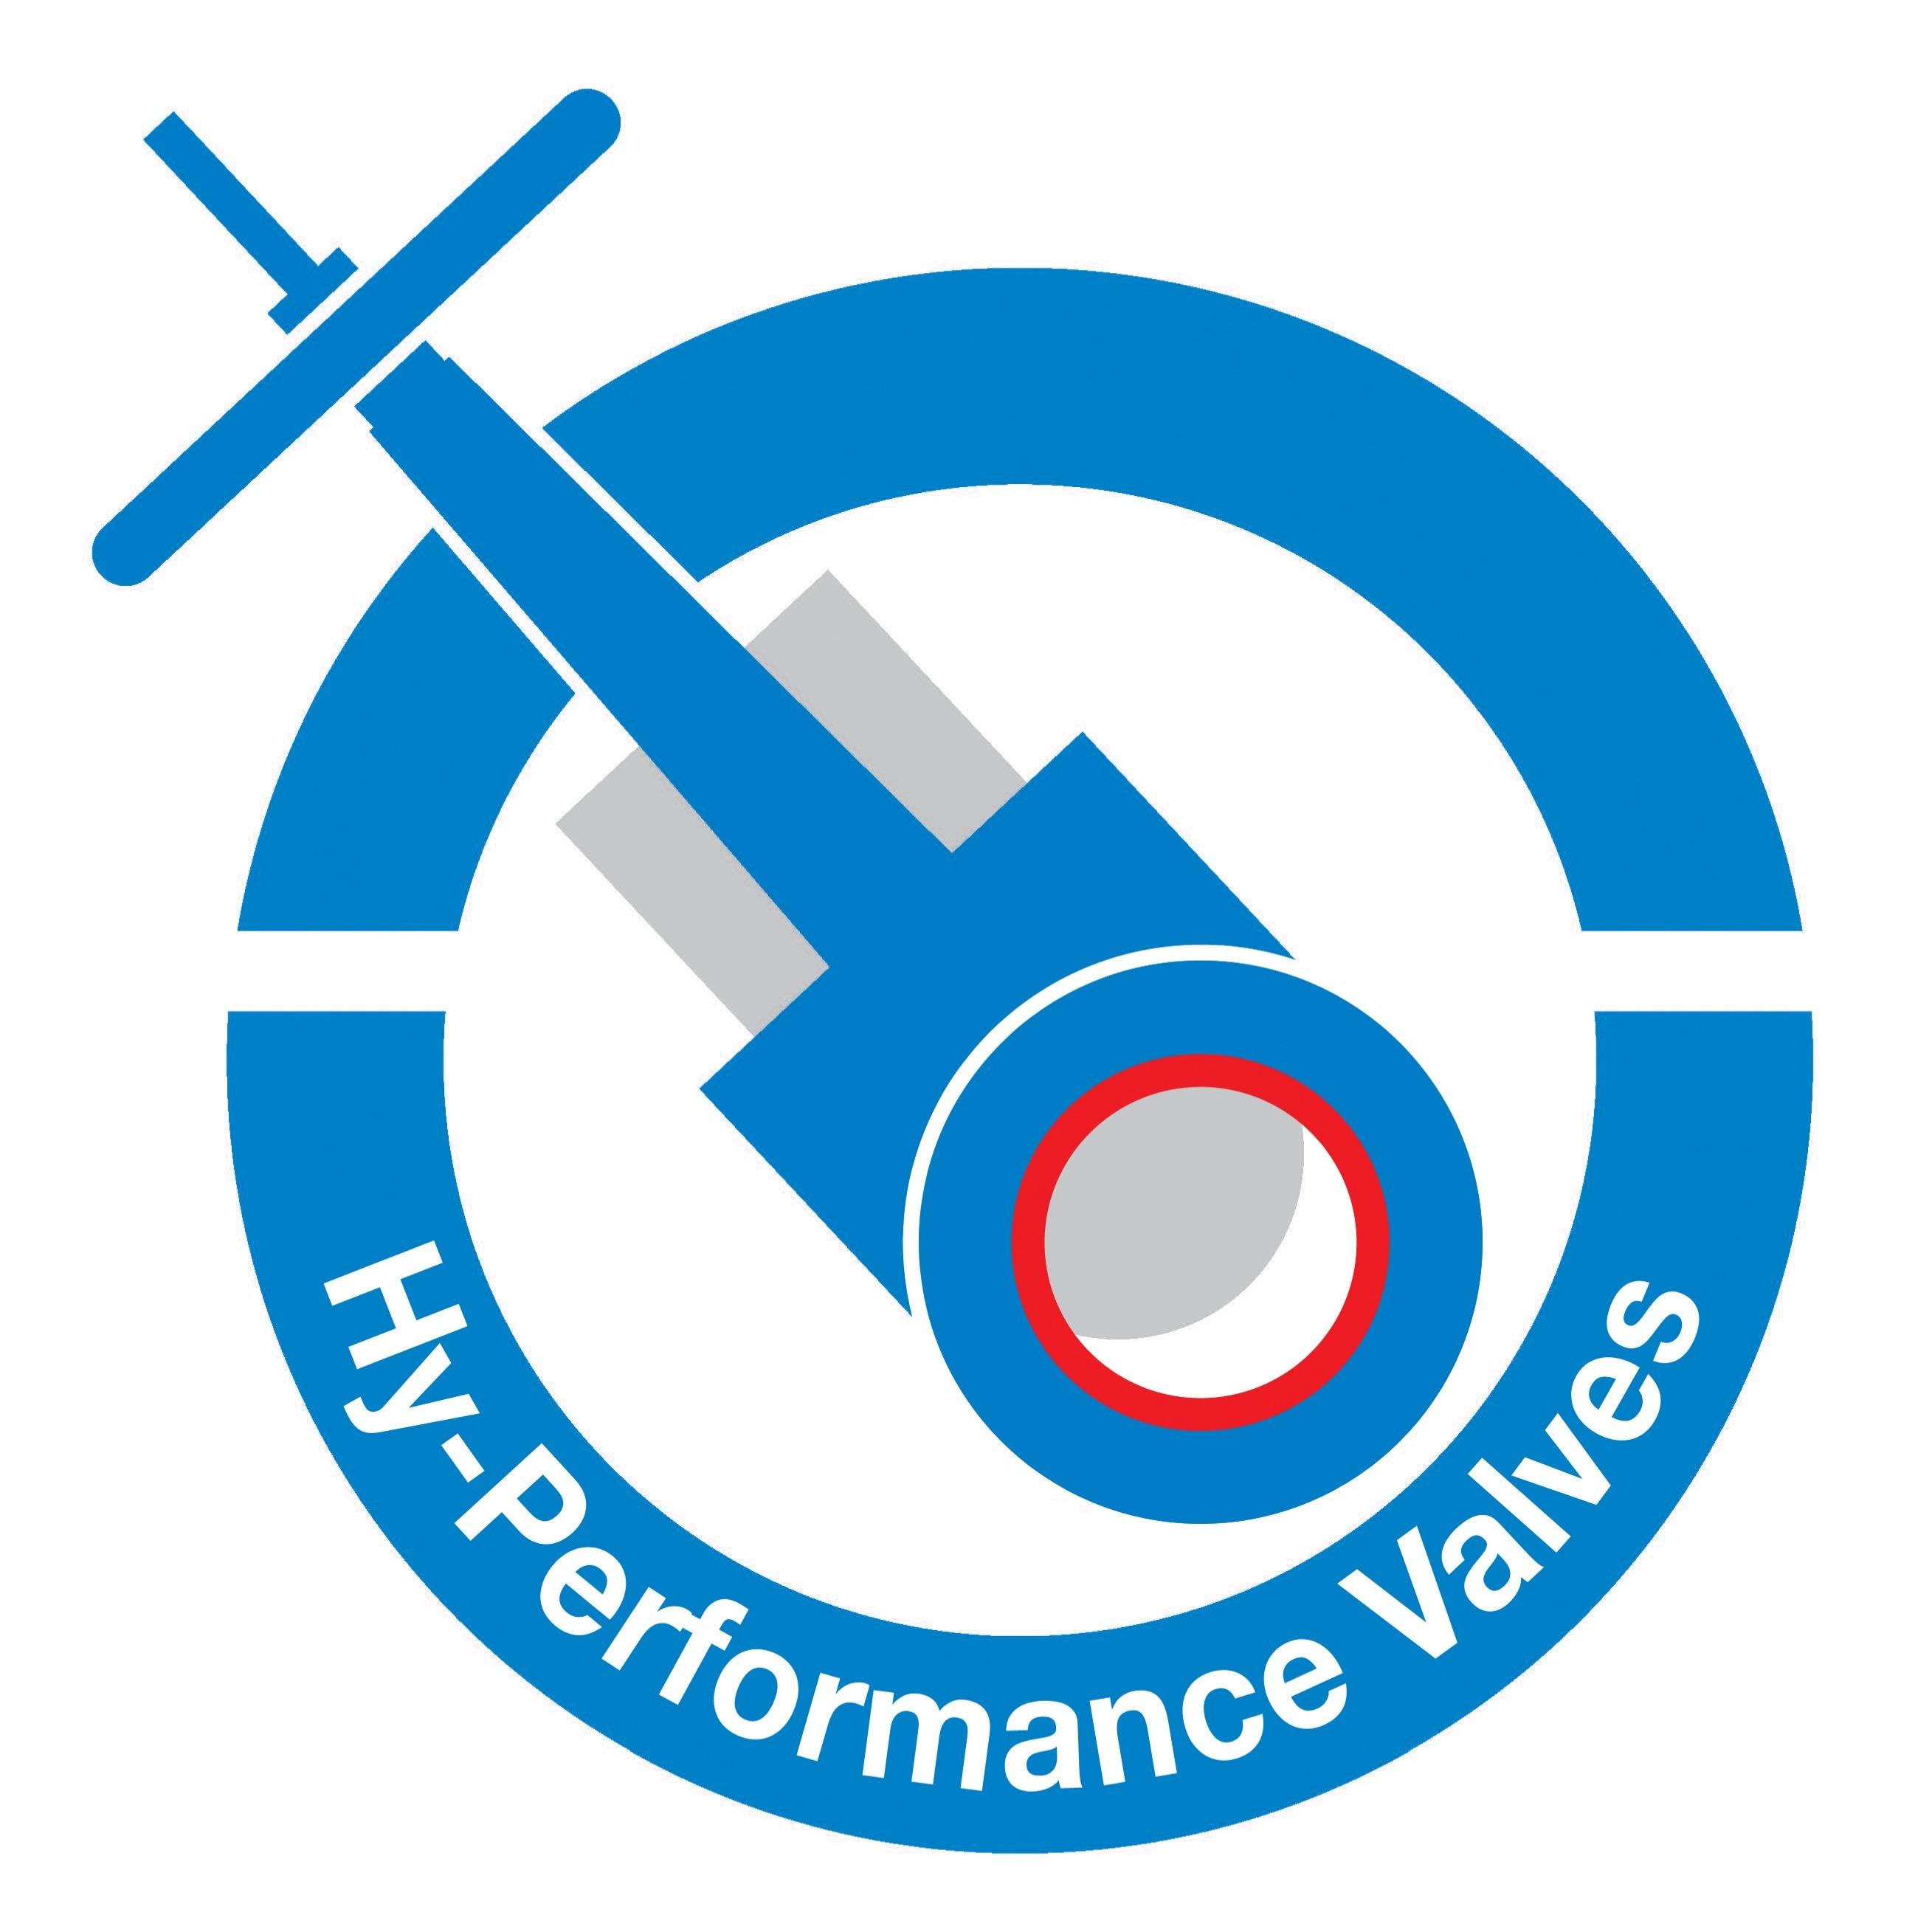 Hy-Performance Valves | Lined Butterfly, Dewatering Valves, Knife & Slurry Gate | Australia - Artarmon, NSW 2064 - (02) 9437 3288 | ShowMeLocal.com